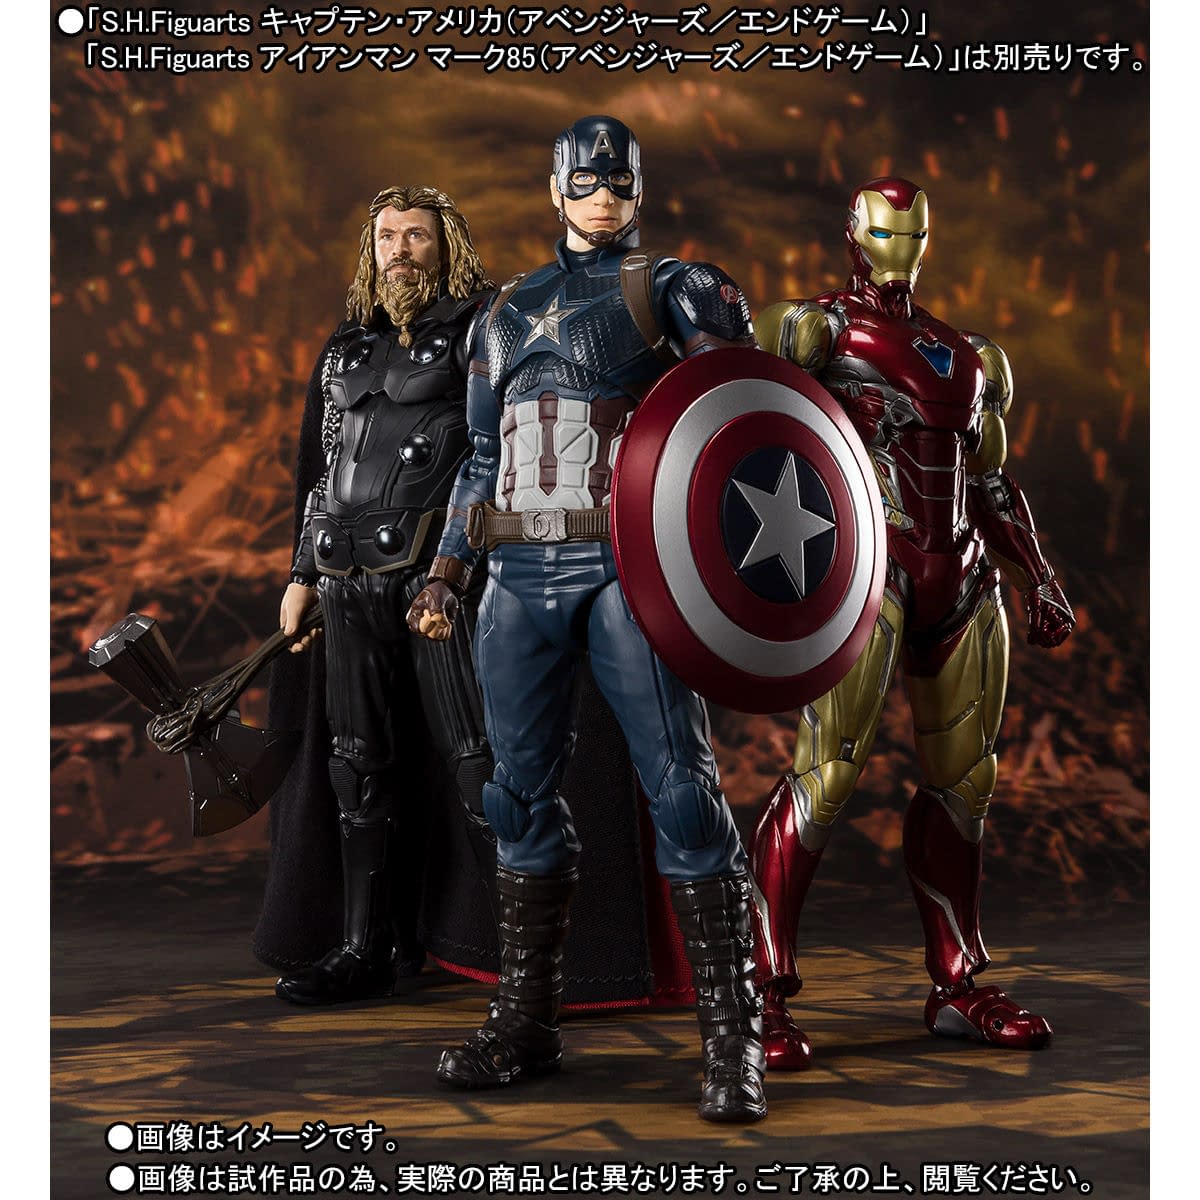 Dude Thor Brings the Thunder and Cheese Whiz with S.H. Figuarts Figure